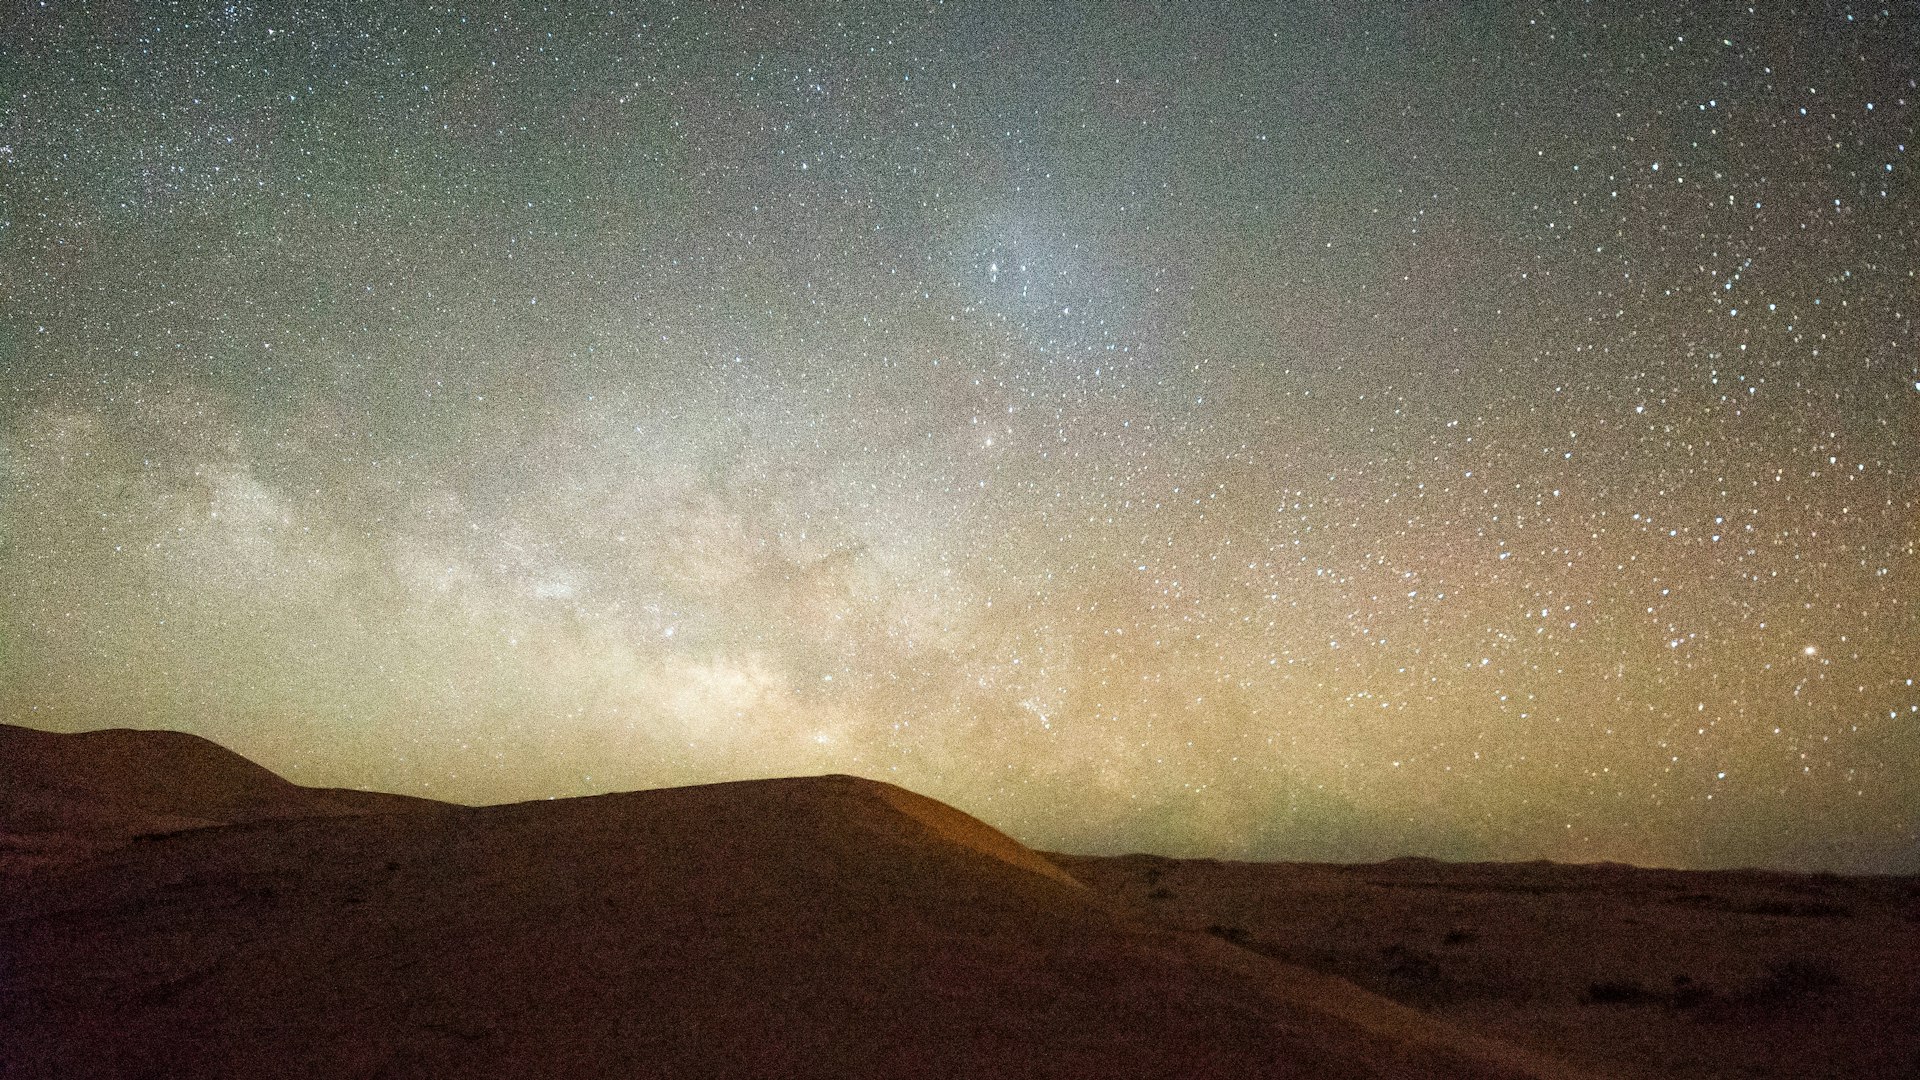 Stars and Miky Way over Sahara desert in Morocco.